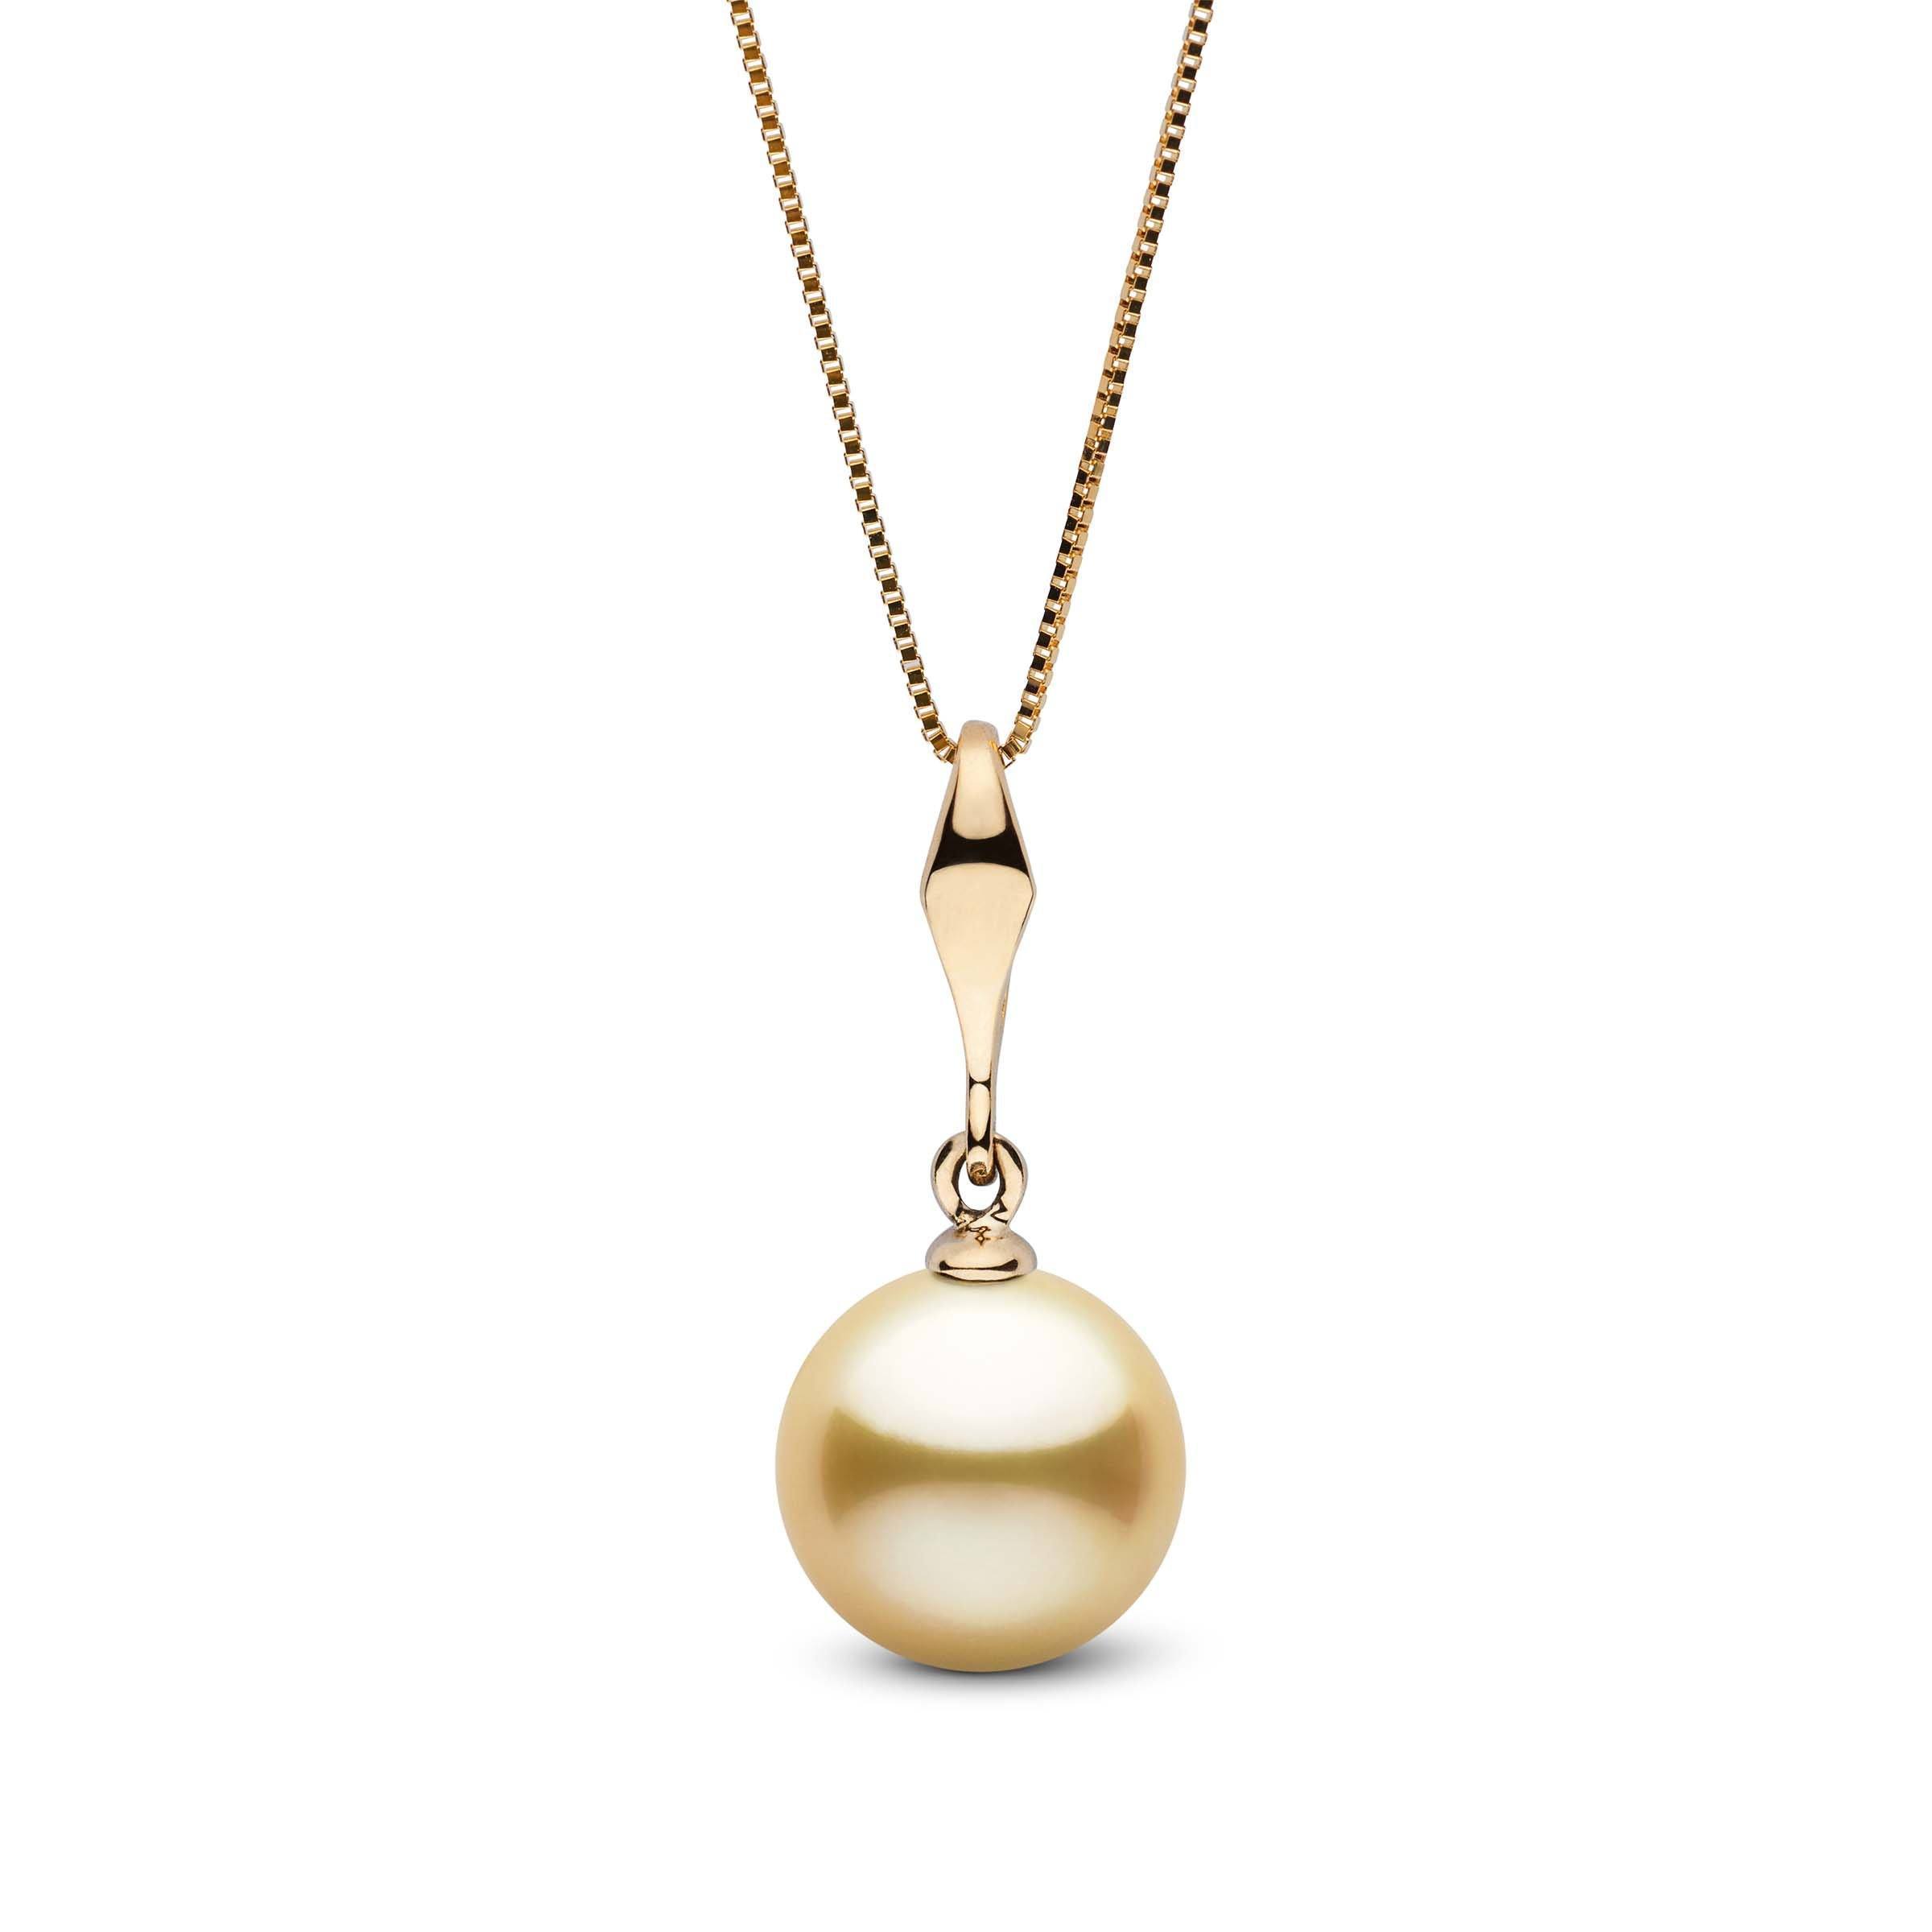 Essential Collection Golden 9.0-10.0 mm South Sea Pearl Pendant